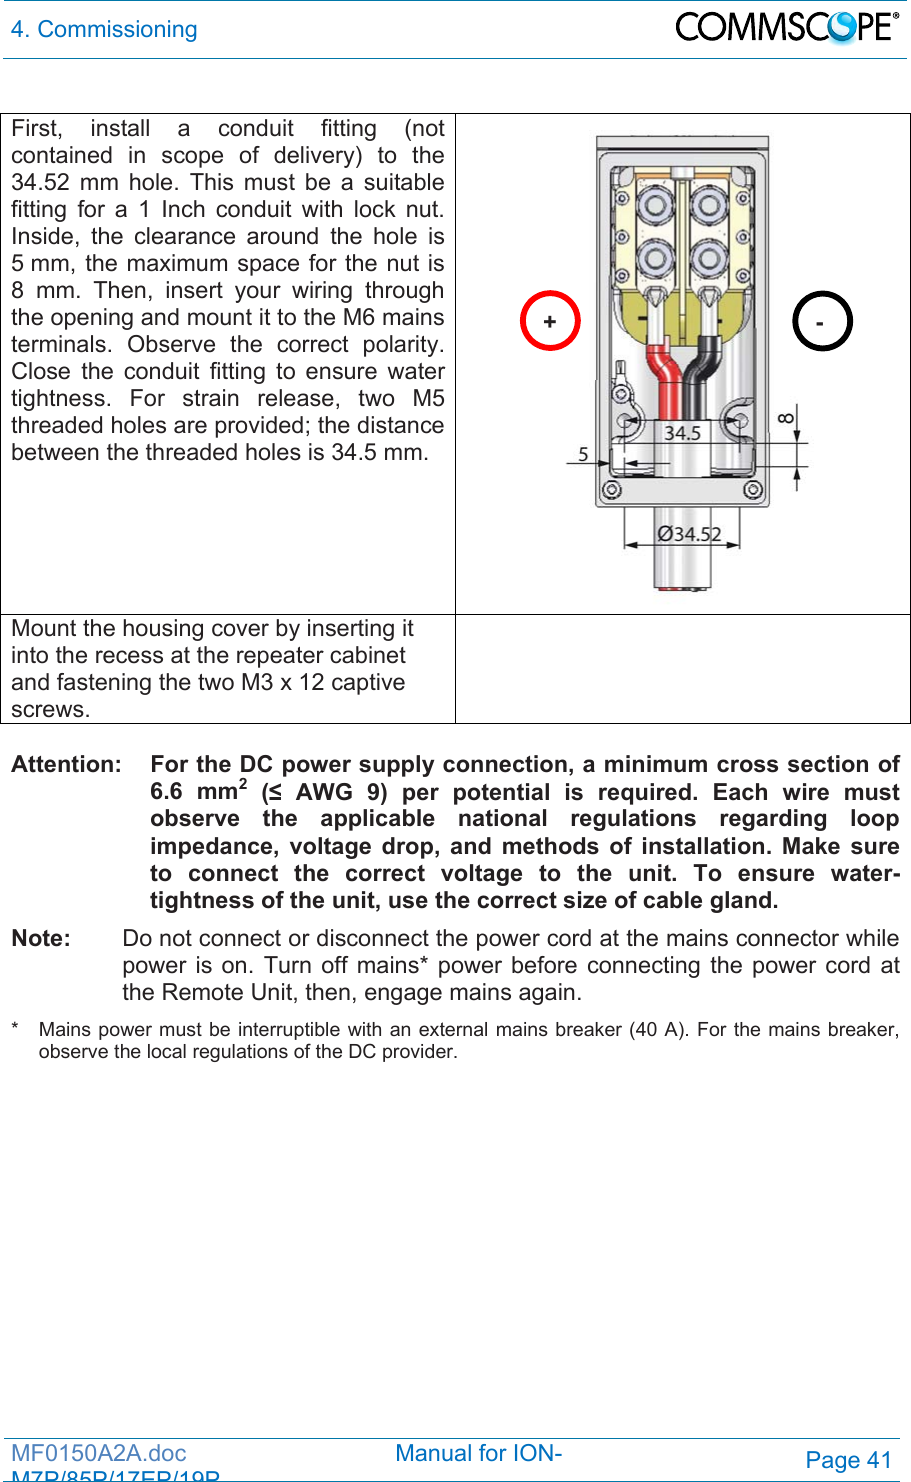 4. Commissioning  MF0150A2A.doc                                Manual for ION-M7P/85P/17EP/19PPage 41  First, install a conduit fitting (not contained in scope of delivery) to the 34.52 mm hole. This must be a suitable fitting for a 1 Inch conduit with lock nut.  Inside, the clearance around the hole is 5 mm, the maximum space for the nut is 8 mm. Then, insert your wiring through the opening and mount it to the M6 mains terminals. Observe the correct polarity. Close the conduit fitting to ensure water tightness. For strain release, two M5 threaded holes are provided; the distance between the threaded holes is 34.5 mm.  Mount the housing cover by inserting it into the recess at the repeater cabinet and fastening the two M3 x 12 captive screws.   Attention:  For the DC power supply connection, a minimum cross section of 6.6 mm2 (≤ AWG 9) per potential is required. Each wire must observe the applicable national regulations regarding loop impedance, voltage drop, and methods of installation. Make sure to connect the correct voltage to the unit. To ensure water-tightness of the unit, use the correct size of cable gland. Note:   Do not connect or disconnect the power cord at the mains connector while power is on. Turn off mains* power before connecting the power cord at the Remote Unit, then, engage mains again. *   Mains power must be interruptible with an external mains breaker (40 A). For the mains breaker, observe the local regulations of the DC provider.  +- 